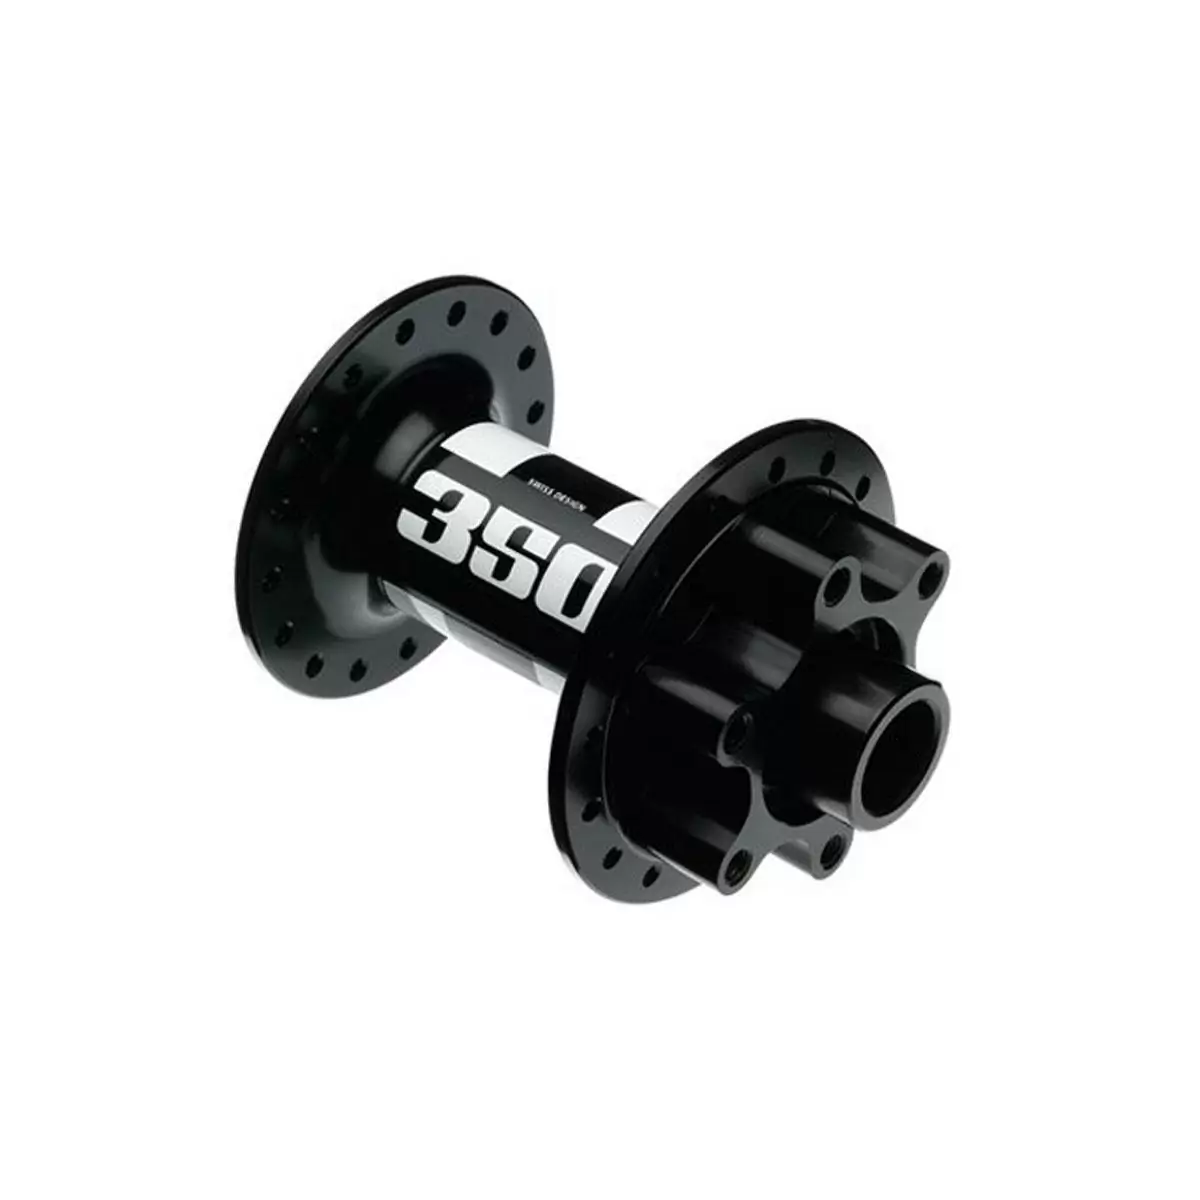 Forward hub 350 disc brake is without quick release 100mm/15mm - image